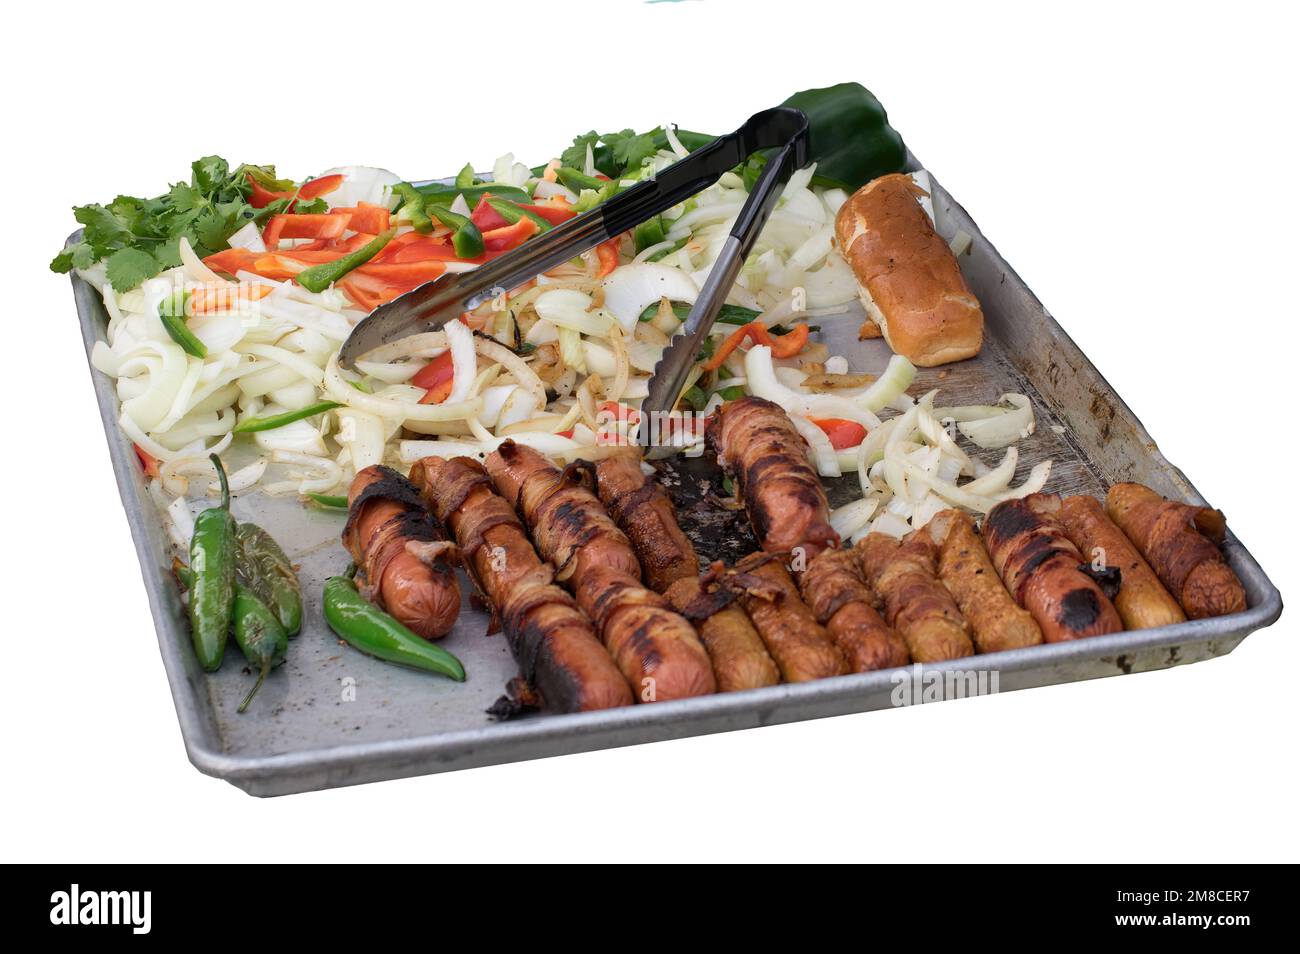 Fast food tray, hot dogs, buns and stirred fried vegetables offered by street vendor, shown against a white background. Stock Photo